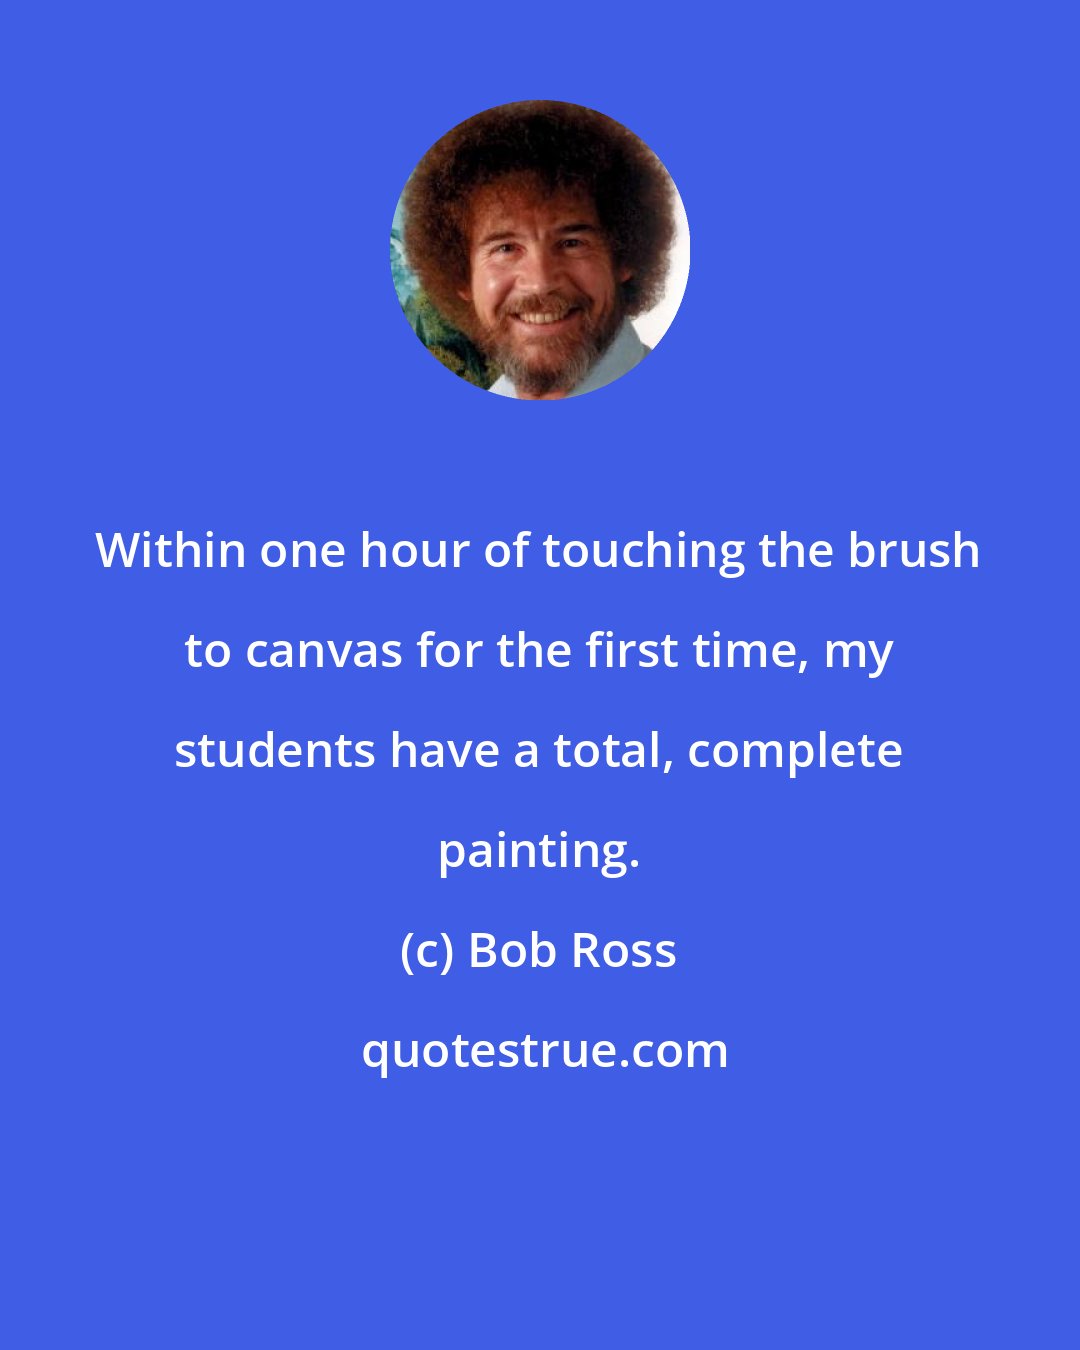 Bob Ross: Within one hour of touching the brush to canvas for the first time, my students have a total, complete painting.